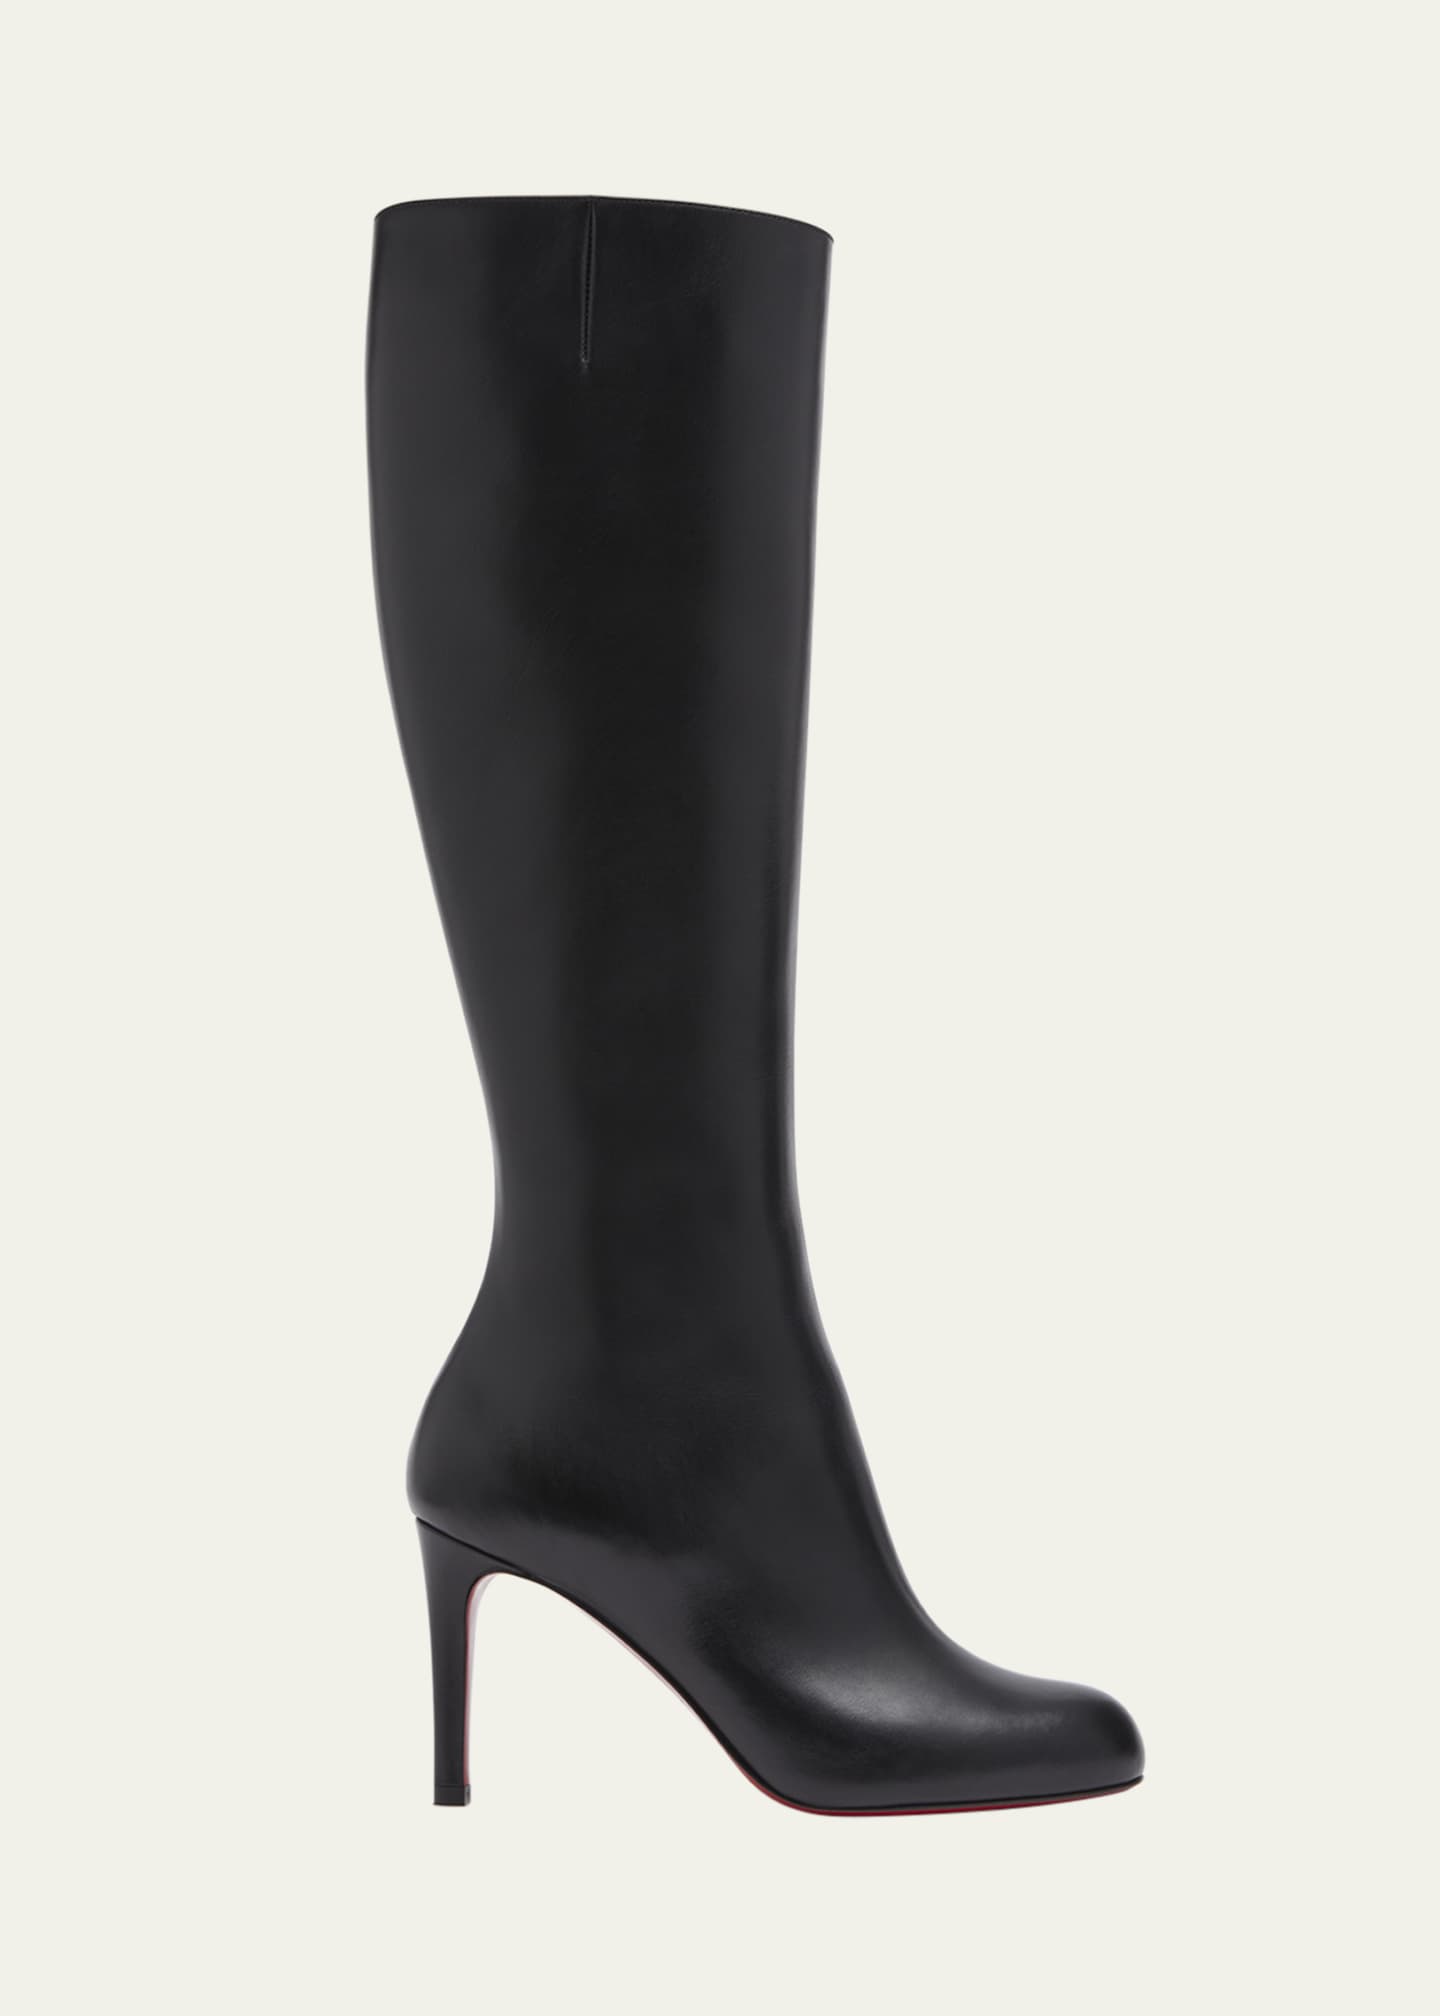 Christian Louboutin Pumppie Botta Red Sole Leather Knee-High Boots ...